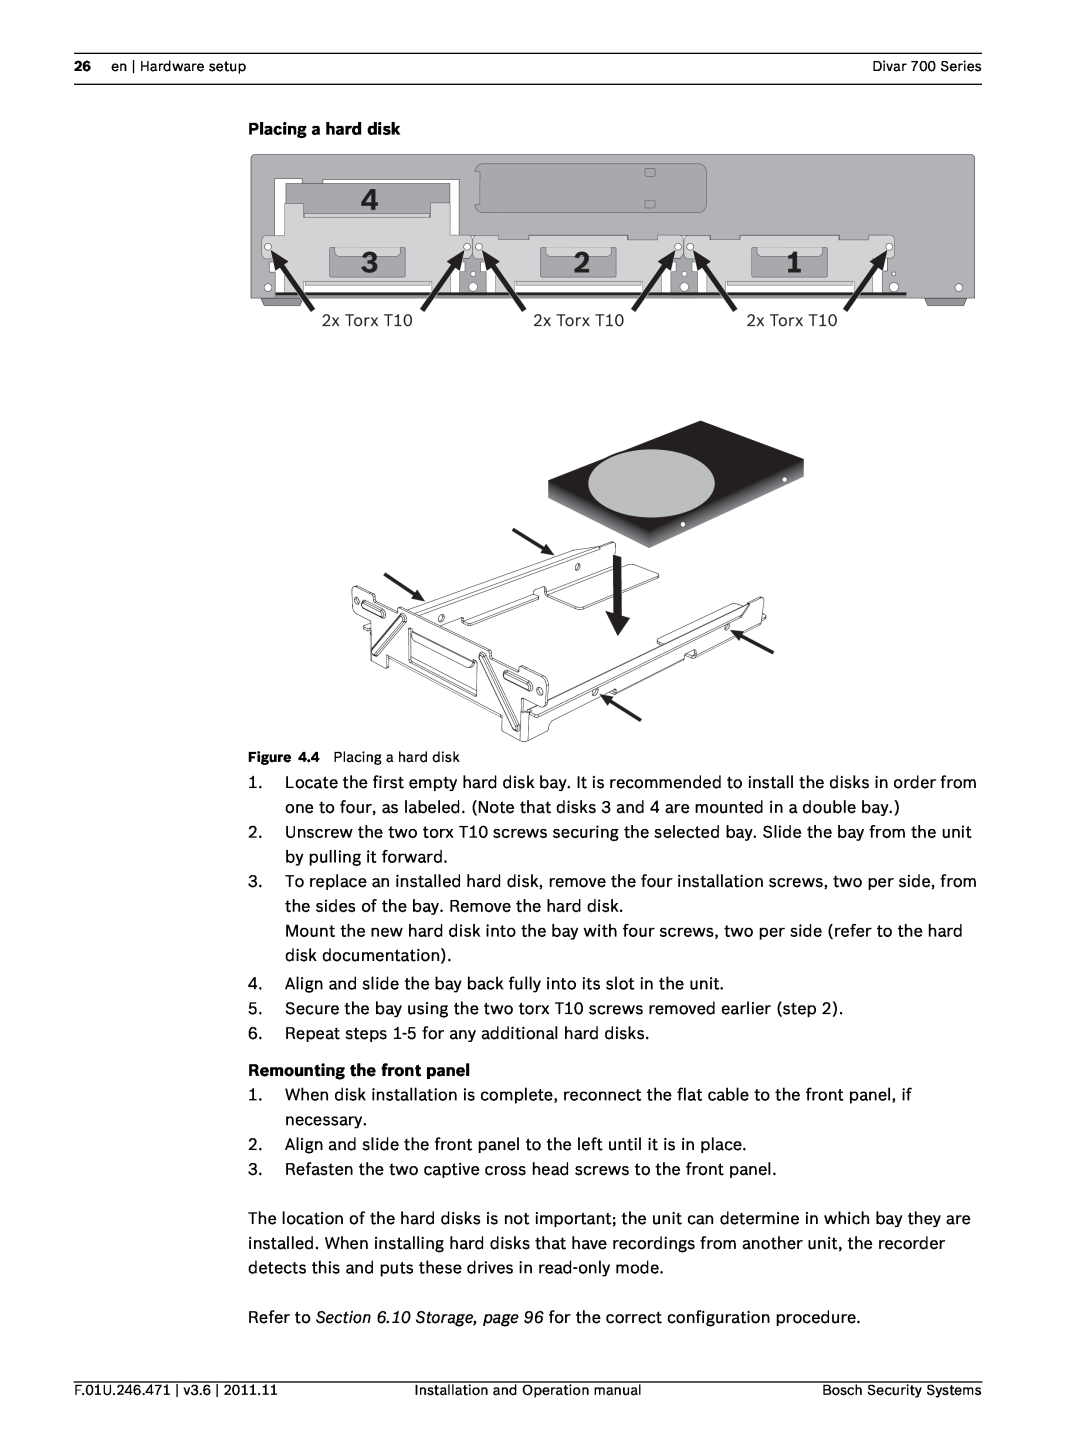 Bosch Appliances 700 operation manual Placing a hard disk, Remounting the front panel 